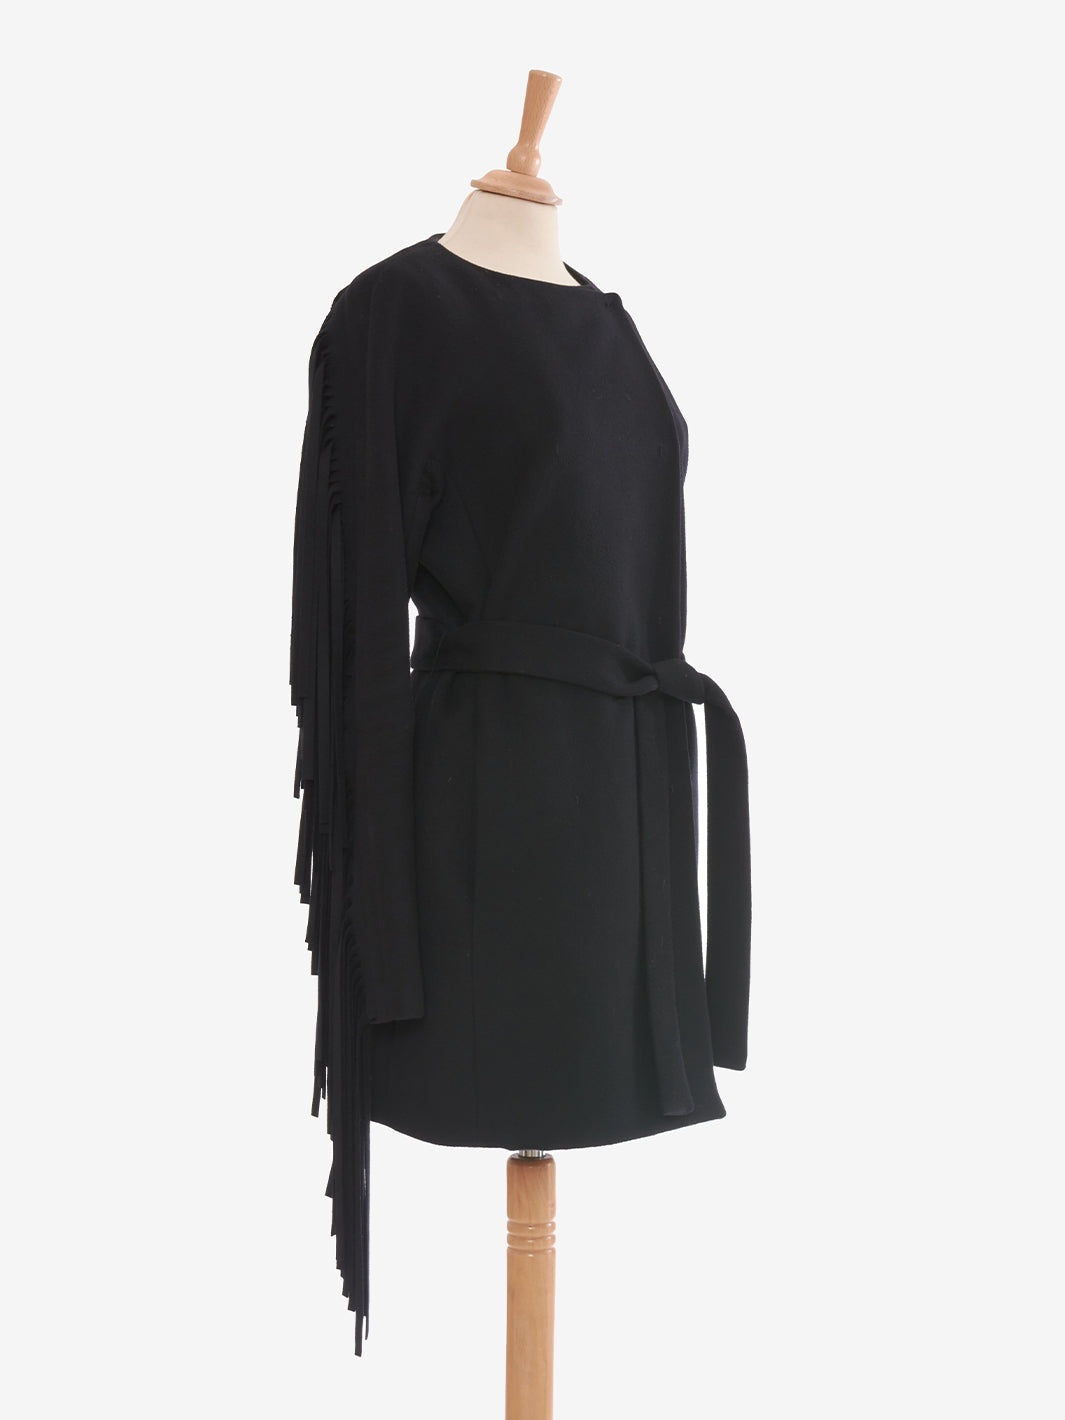 Vionnet Coat with bangs and belt